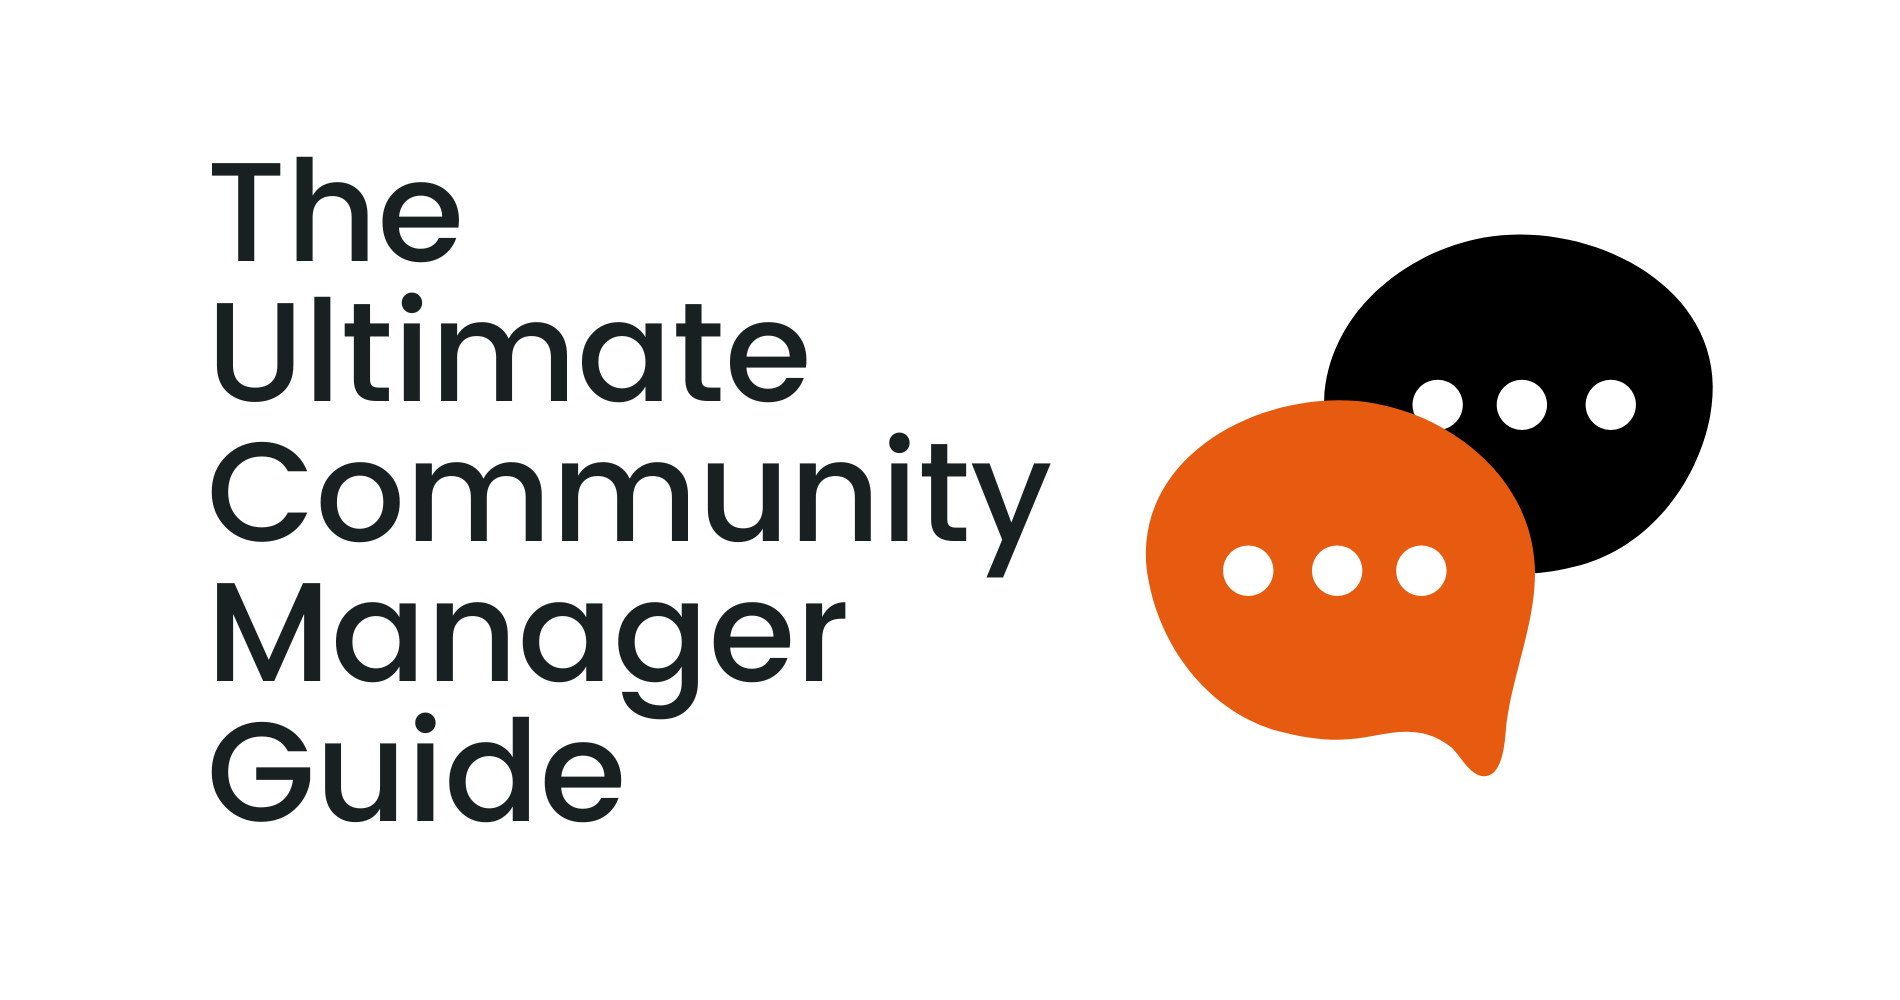 The Ultimate Community Manager Guide